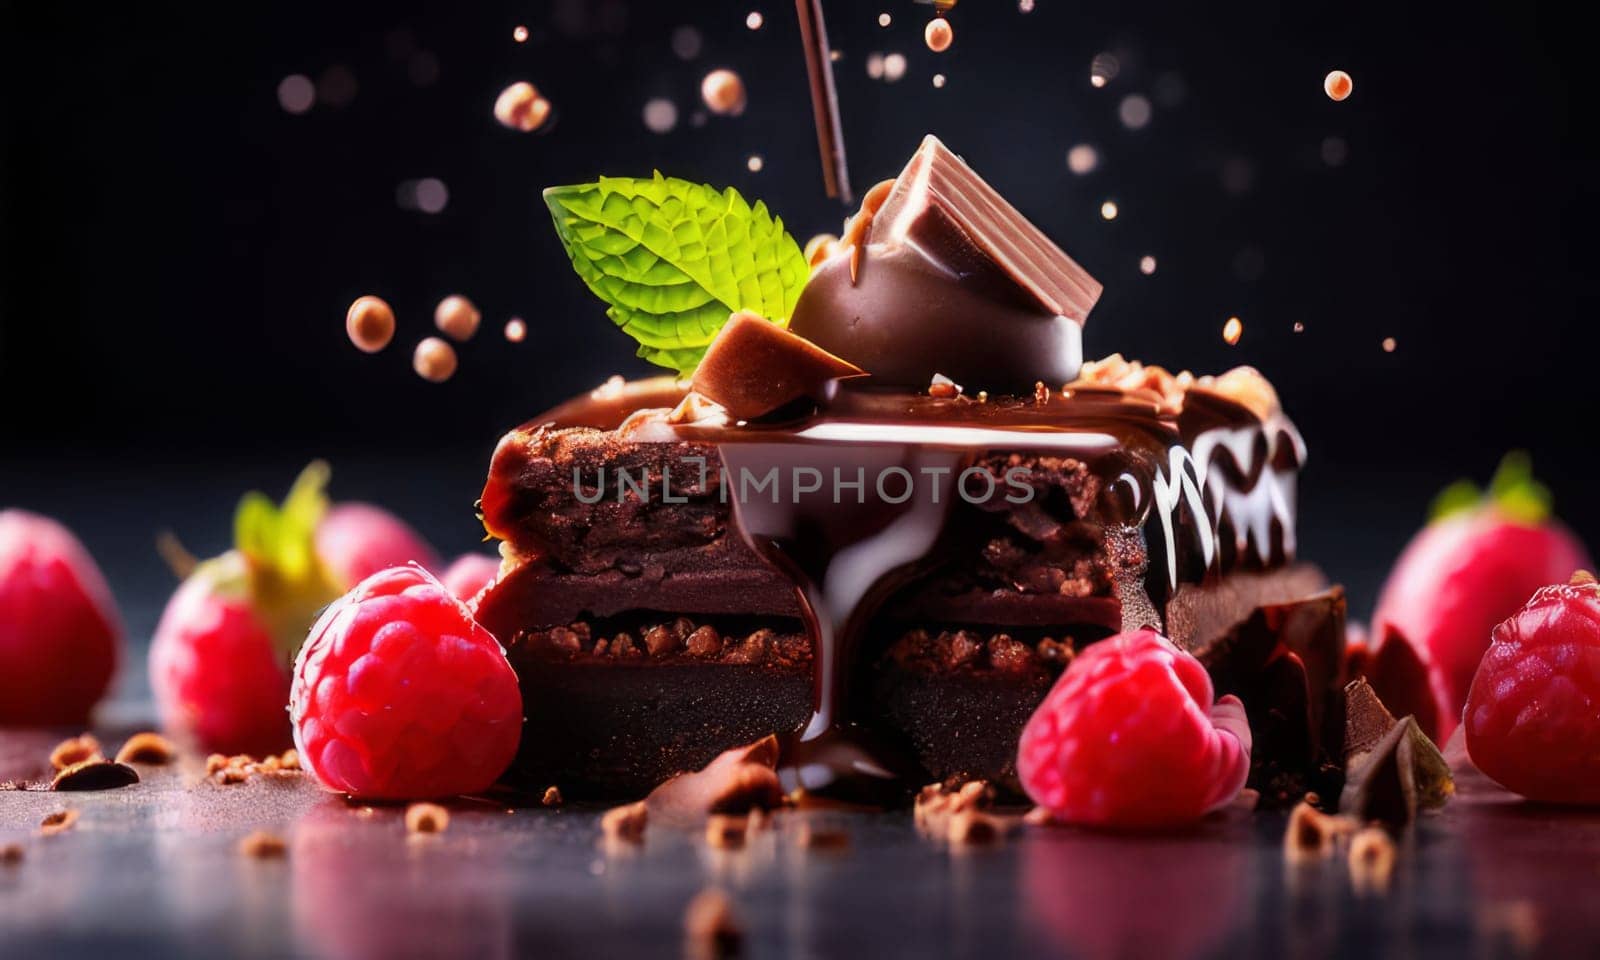 Decadent chocolate cake adorned with fresh raspberries, drizzled with rich chocolate sauce, perfect combination of sweet, tart flavors. For advertise cafe, patisserie, restaurant, food blog, cookbook. by Angelsmoon